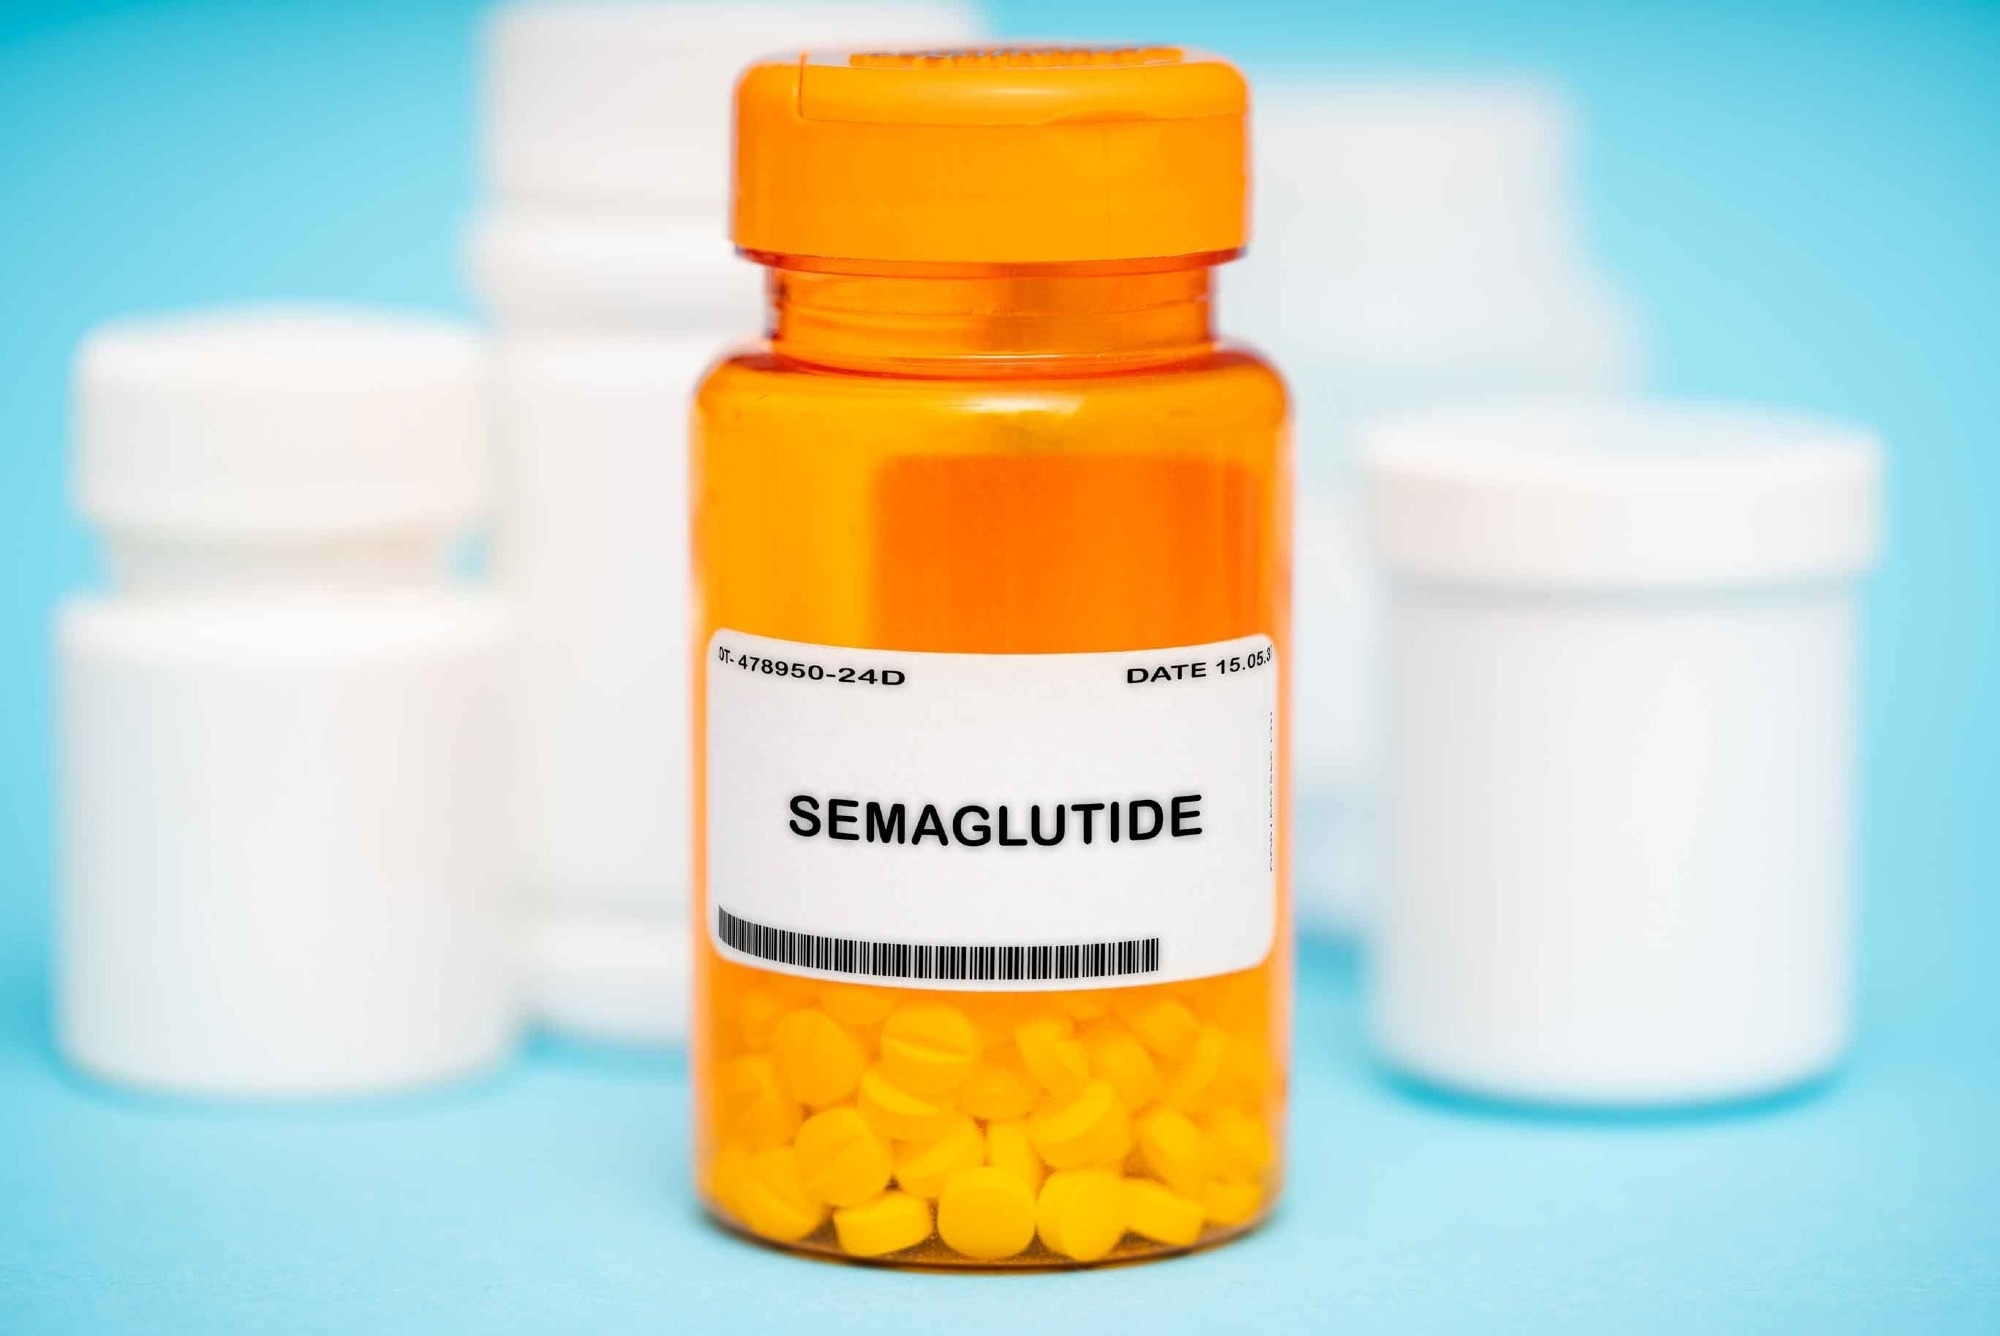 Once-Weekly Semaglutide in Adults with Overweight or Obesity